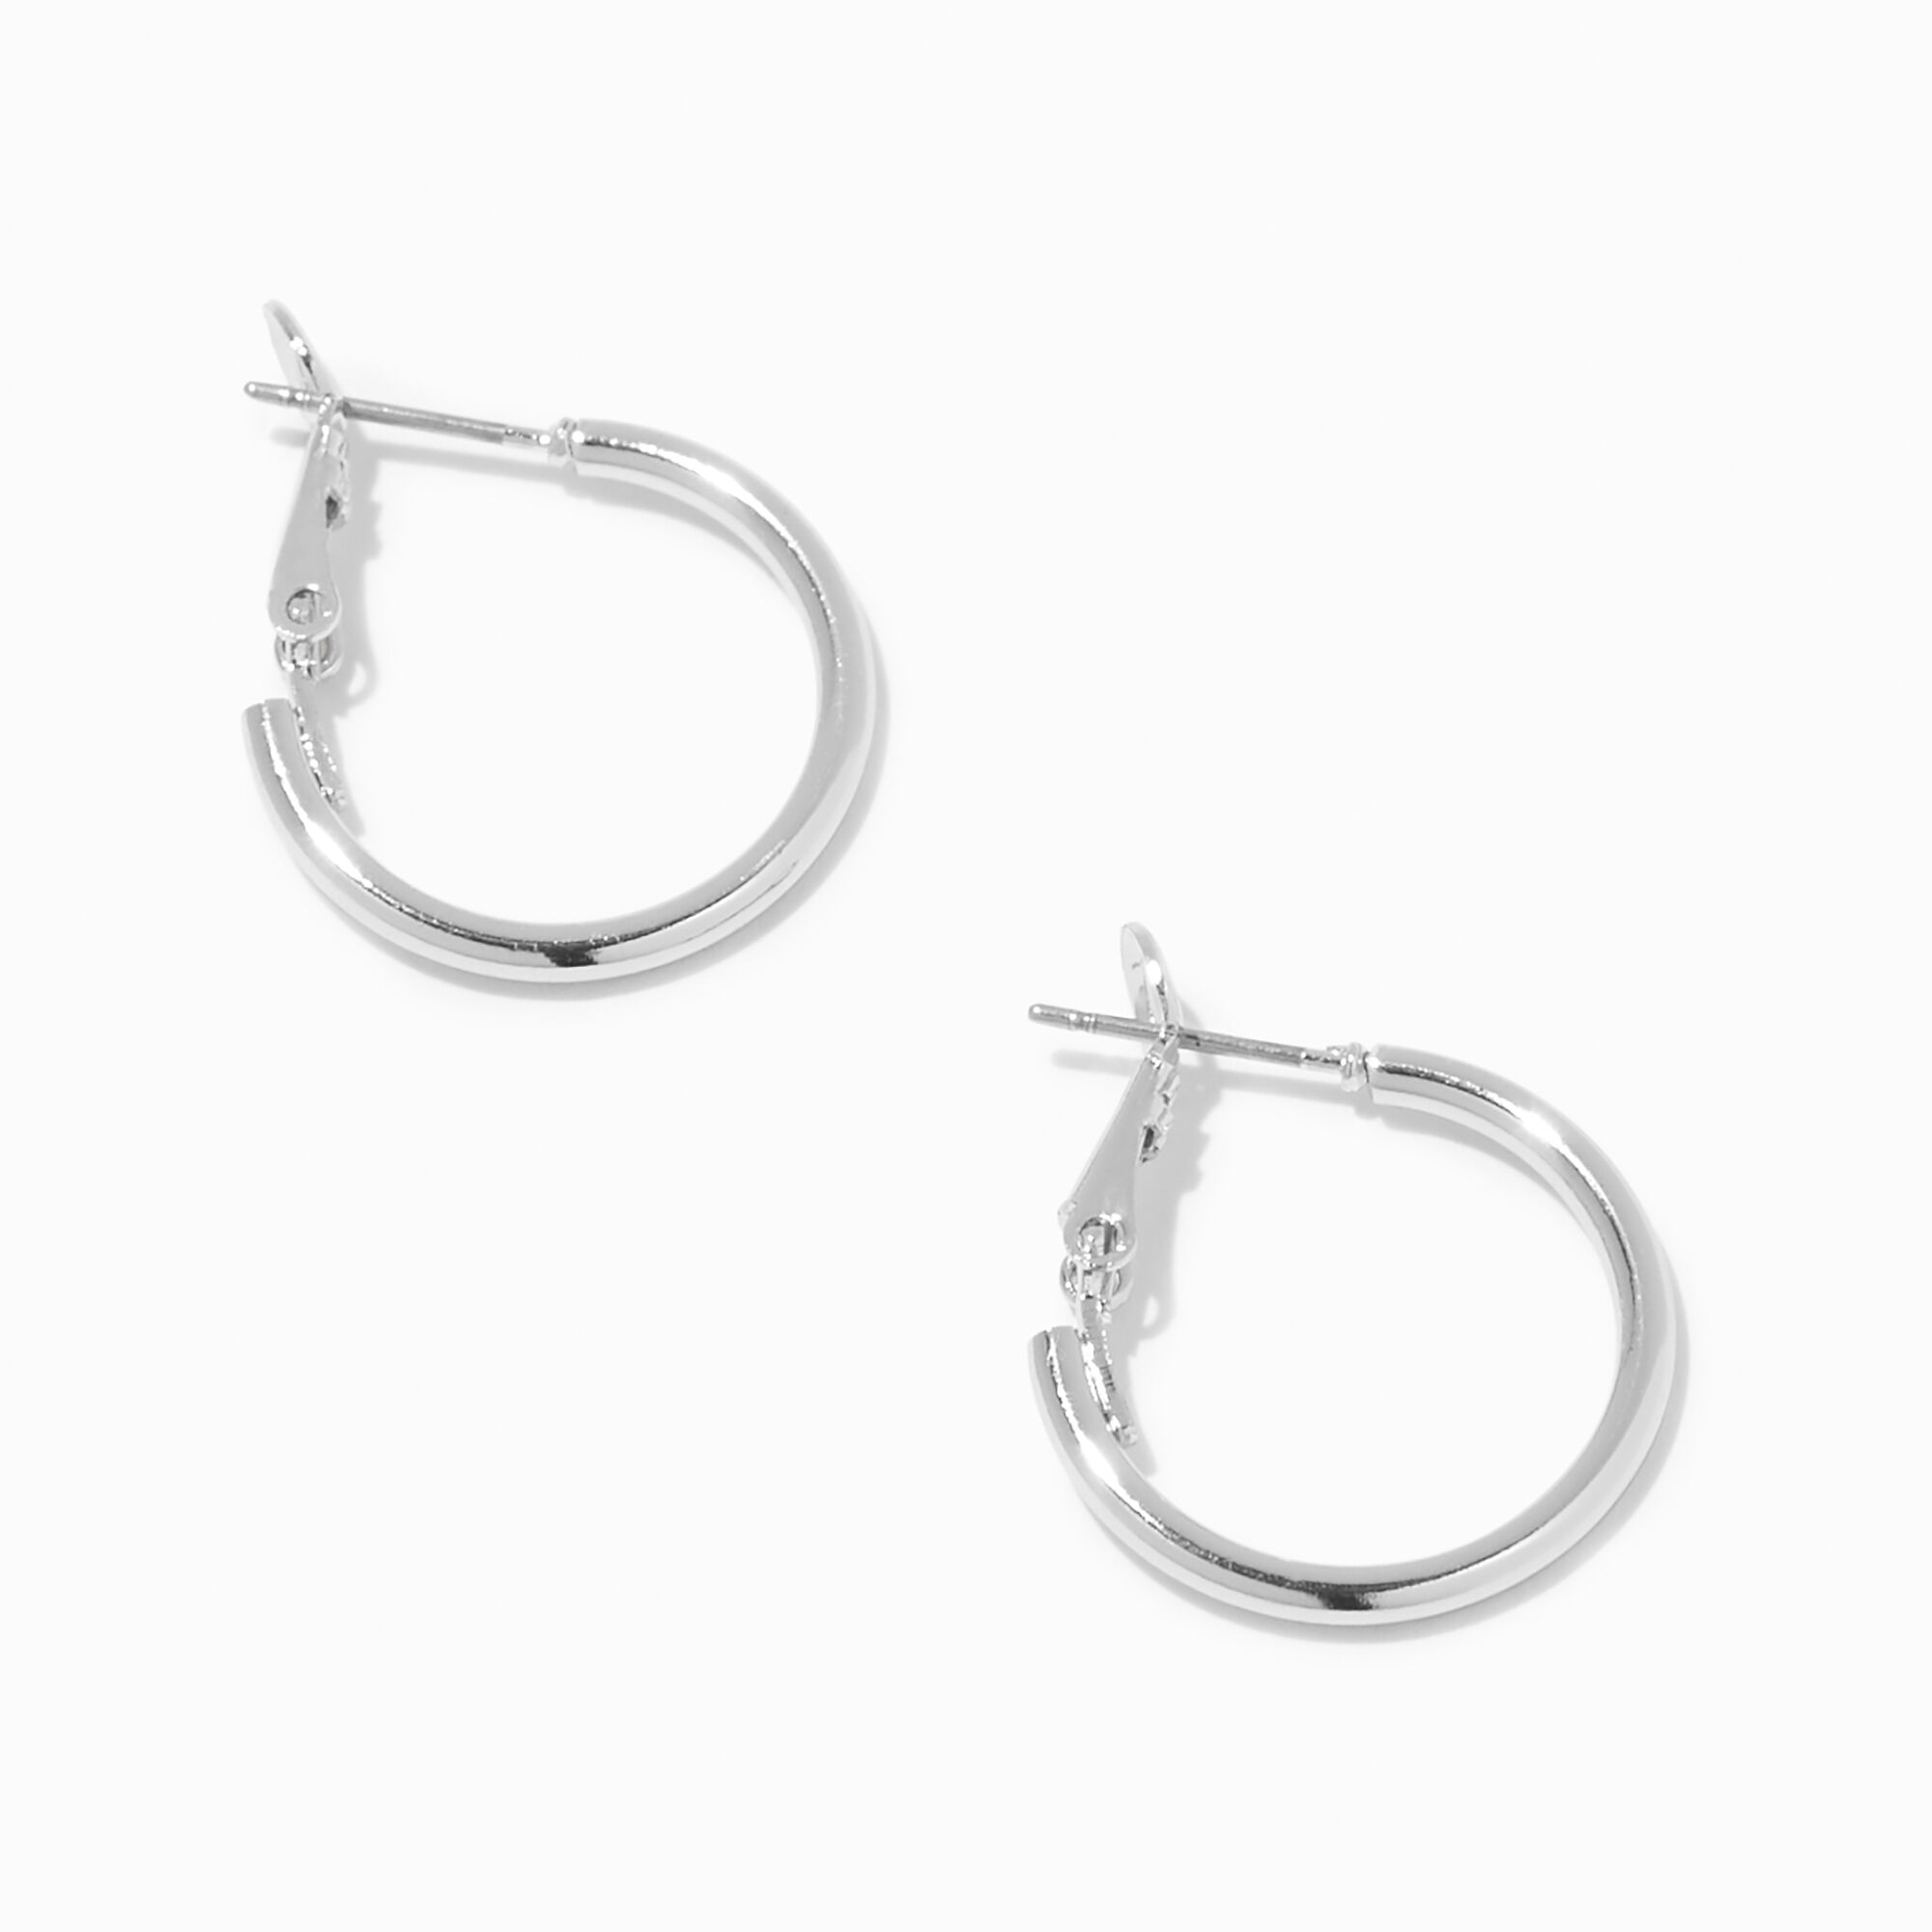 View Claires Recycled Jewelry Tone 20MM Hoop Earrings Silver information